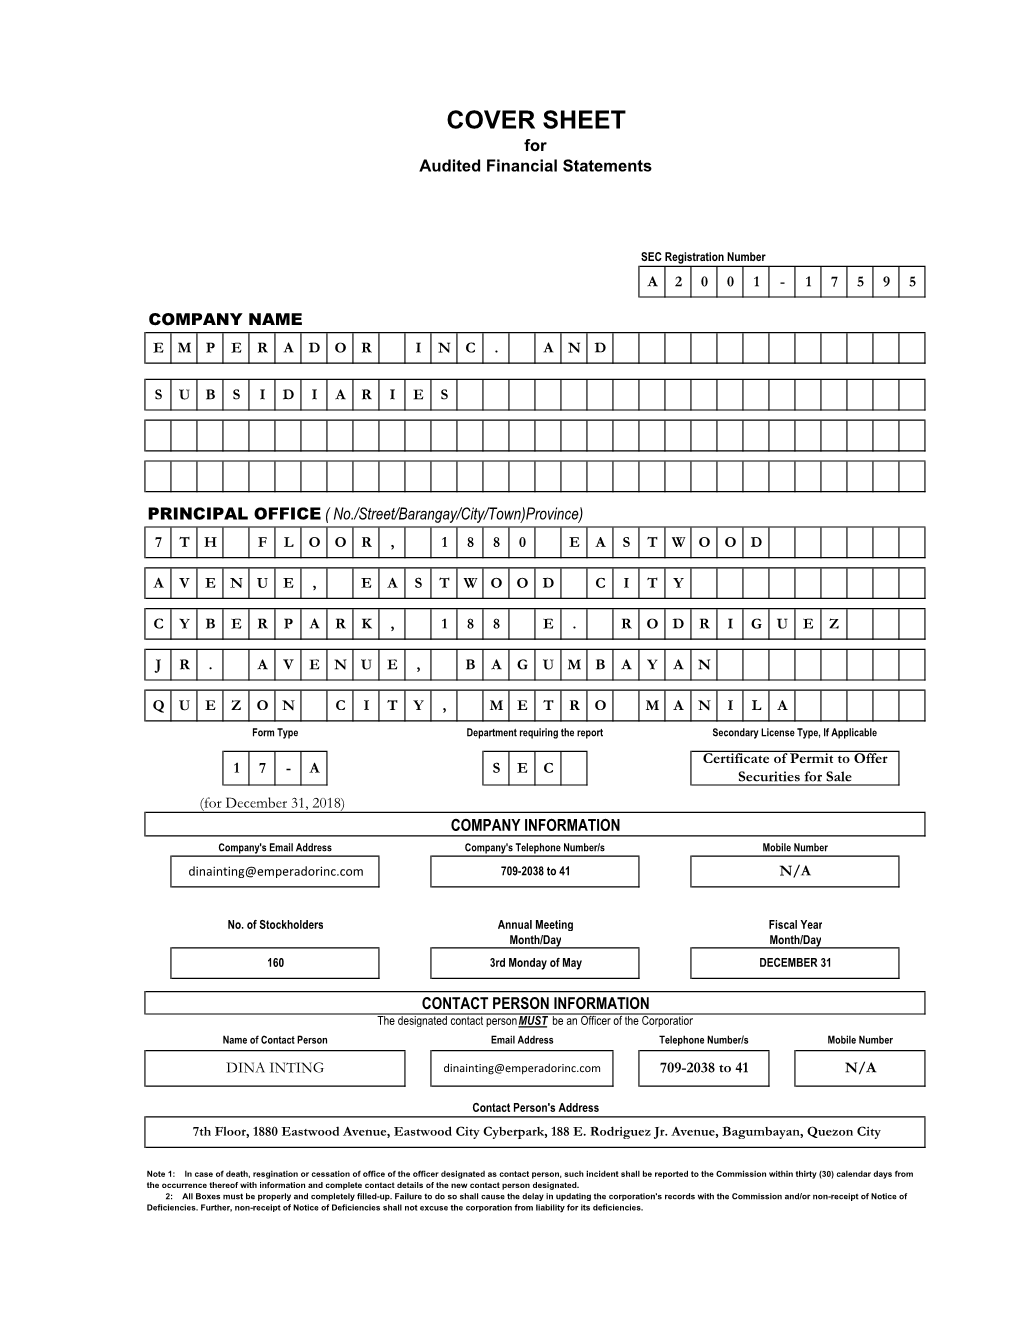 COVER SHEET for Audited Financial Statements